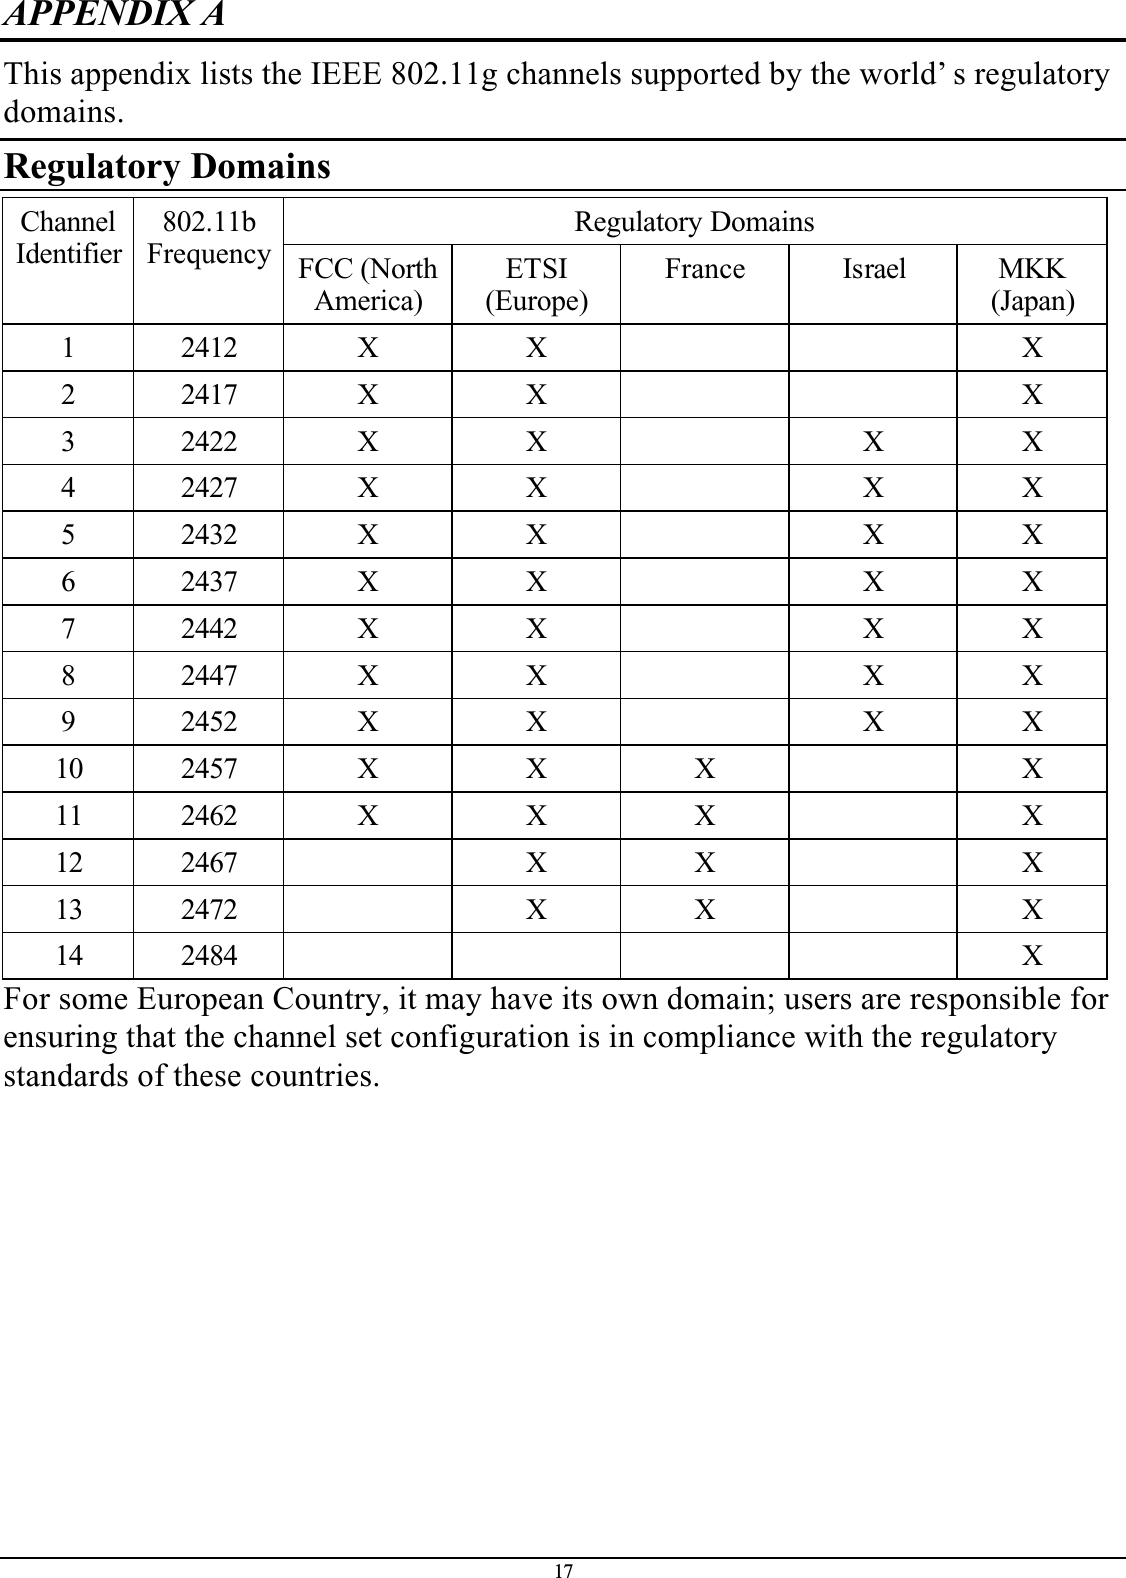 17APPENDIX AThis appendix lists the IEEE 802.11g channels supported by the world’ s regulatory domains.Regulatory DomainsRegulatory DomainsChannelIdentifier802.11bFrequency FCC (North America)ETSI(Europe)France Israel MKK(Japan)1 2412 X X X2 2417 X X X3 2422 X X X X4 2427 X X X X5 2432 X X X X6 2437 X X X X7 2442 X X X X8 2447 X X X X9 2452 X X X X10 2457 X X X X11 2462 X X X X12 2467 X X X13 2472 X X X14 2484 XFor some European Country, it may have its own domain; users are responsible for ensuring that the channel set configuration is in compliance with the regulatory standards of these countries.